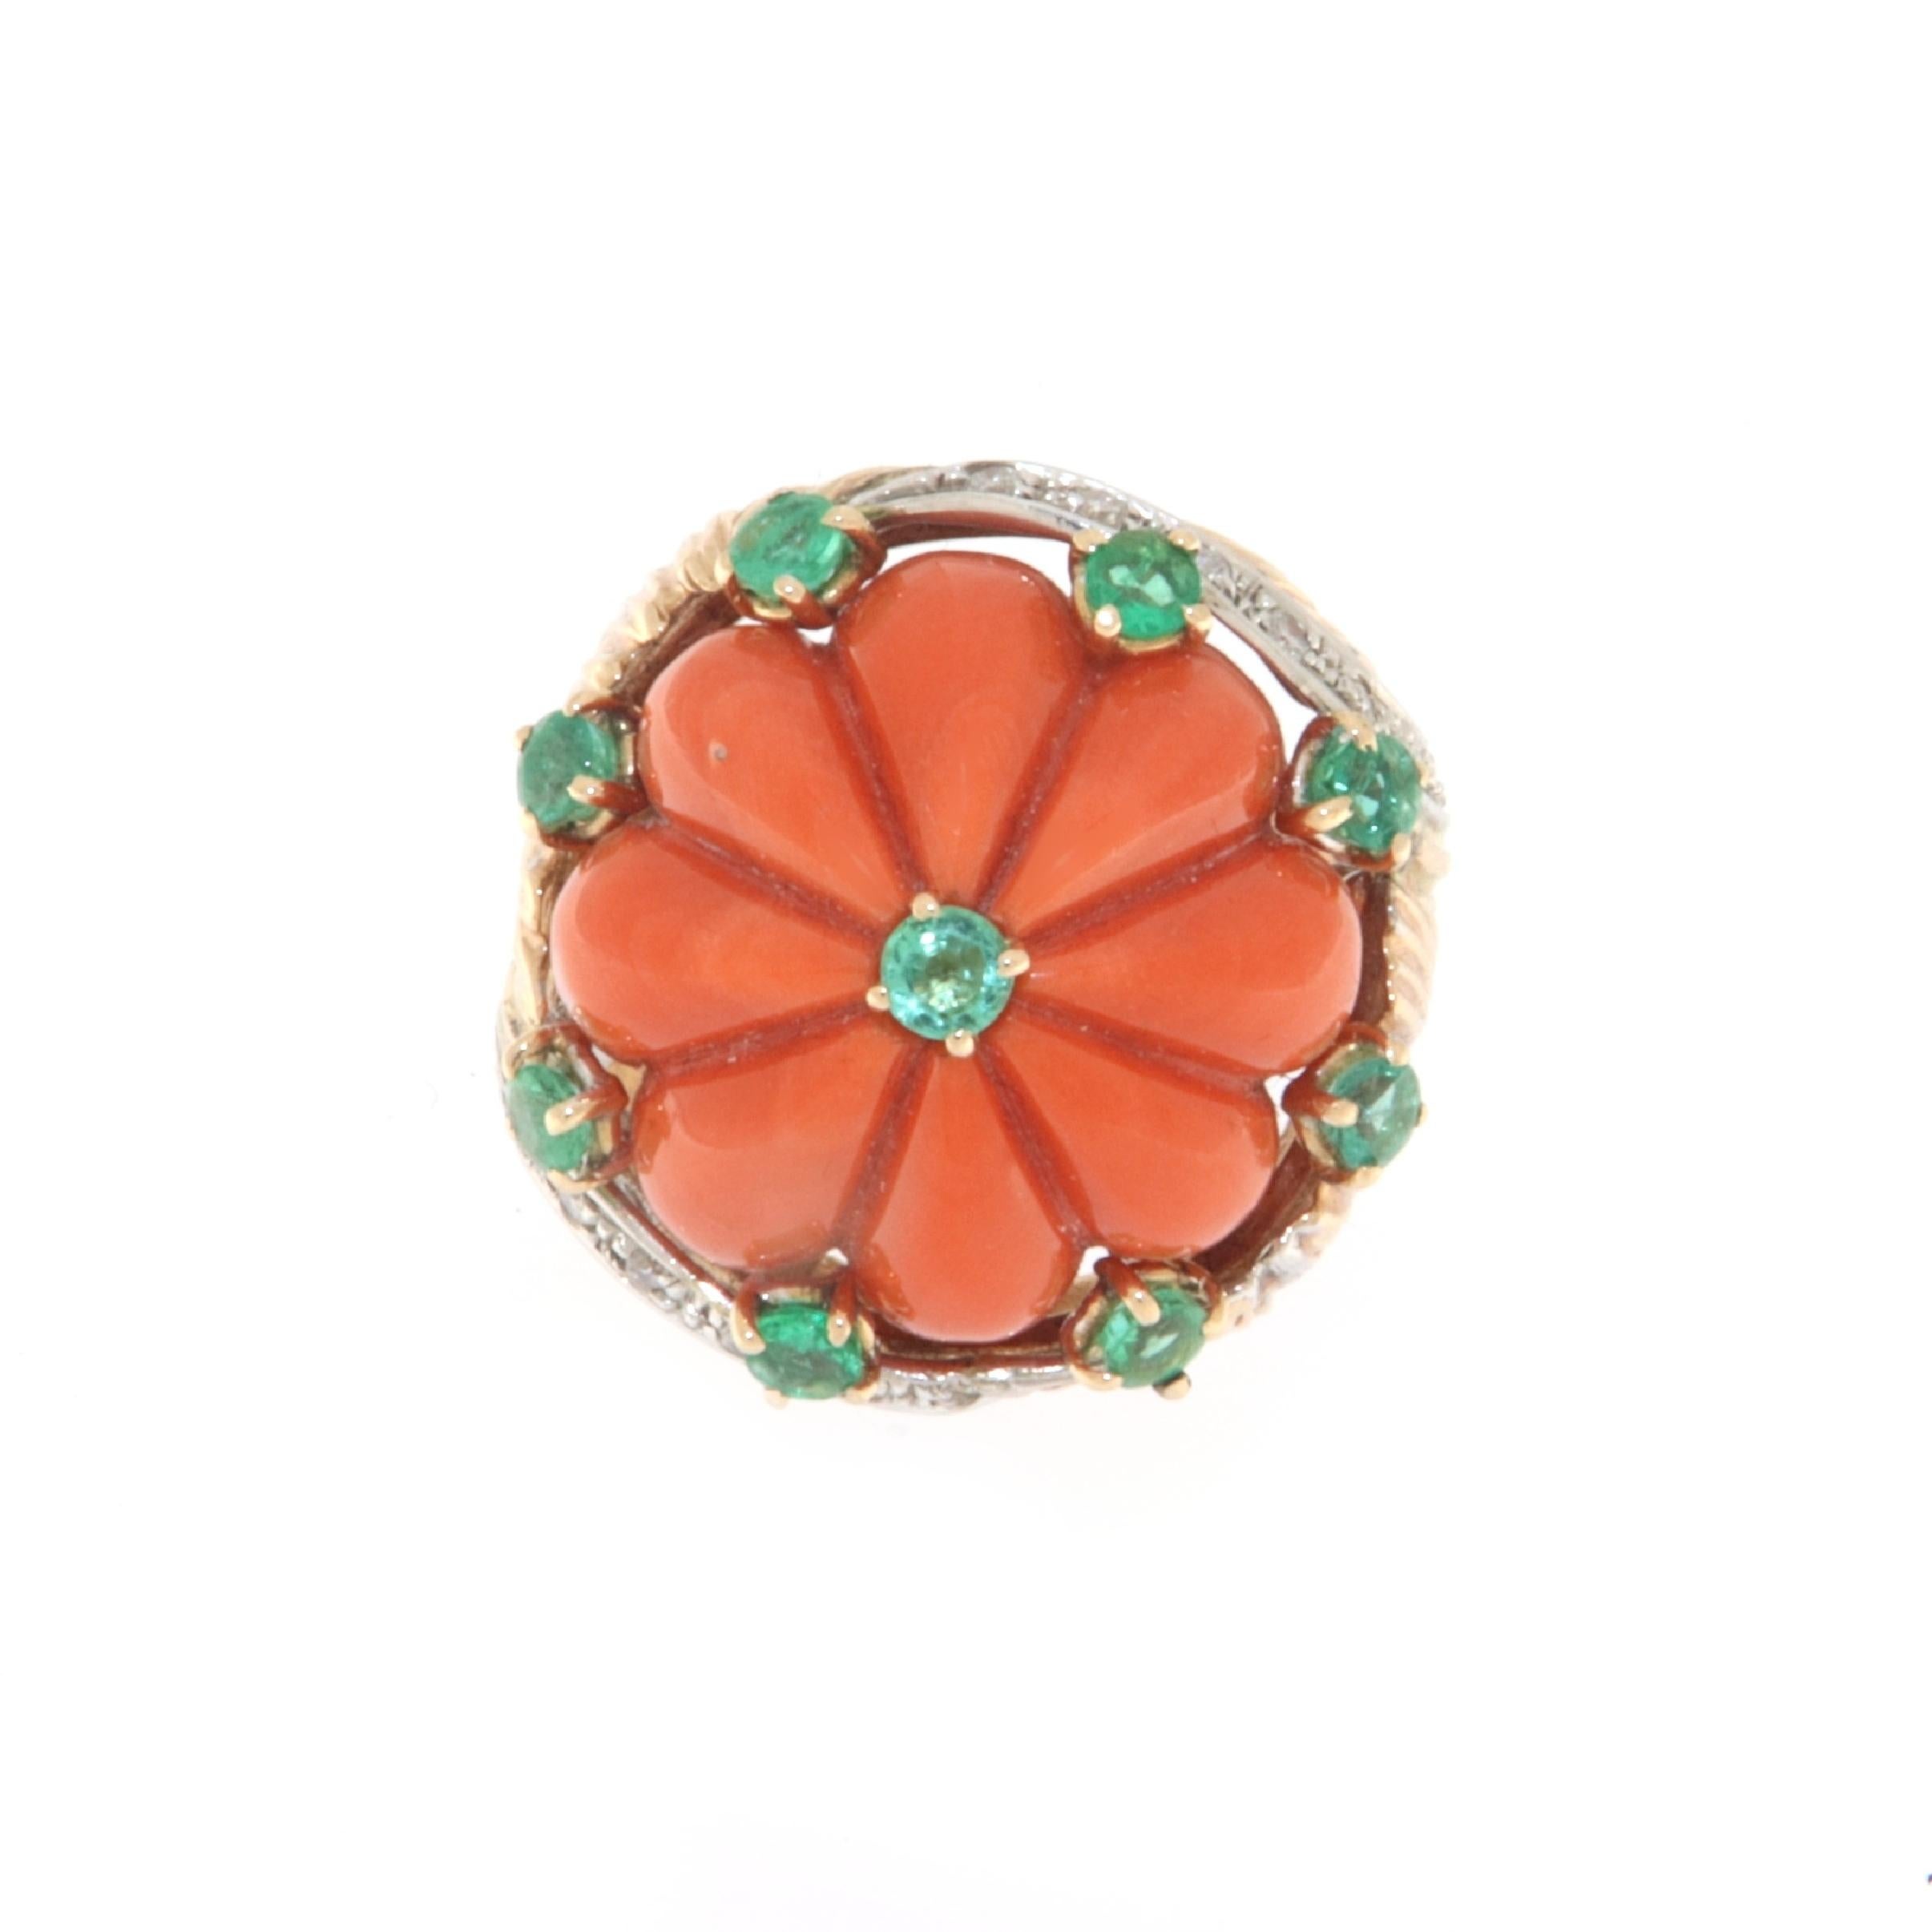 This captivating ring, crafted in a harmonious blend of 14-karat white and yellow gold, is a celebration of creativity and color. At its center, a coral of intense orange color takes a commanding presence, symbolizing joy and vital energy. The